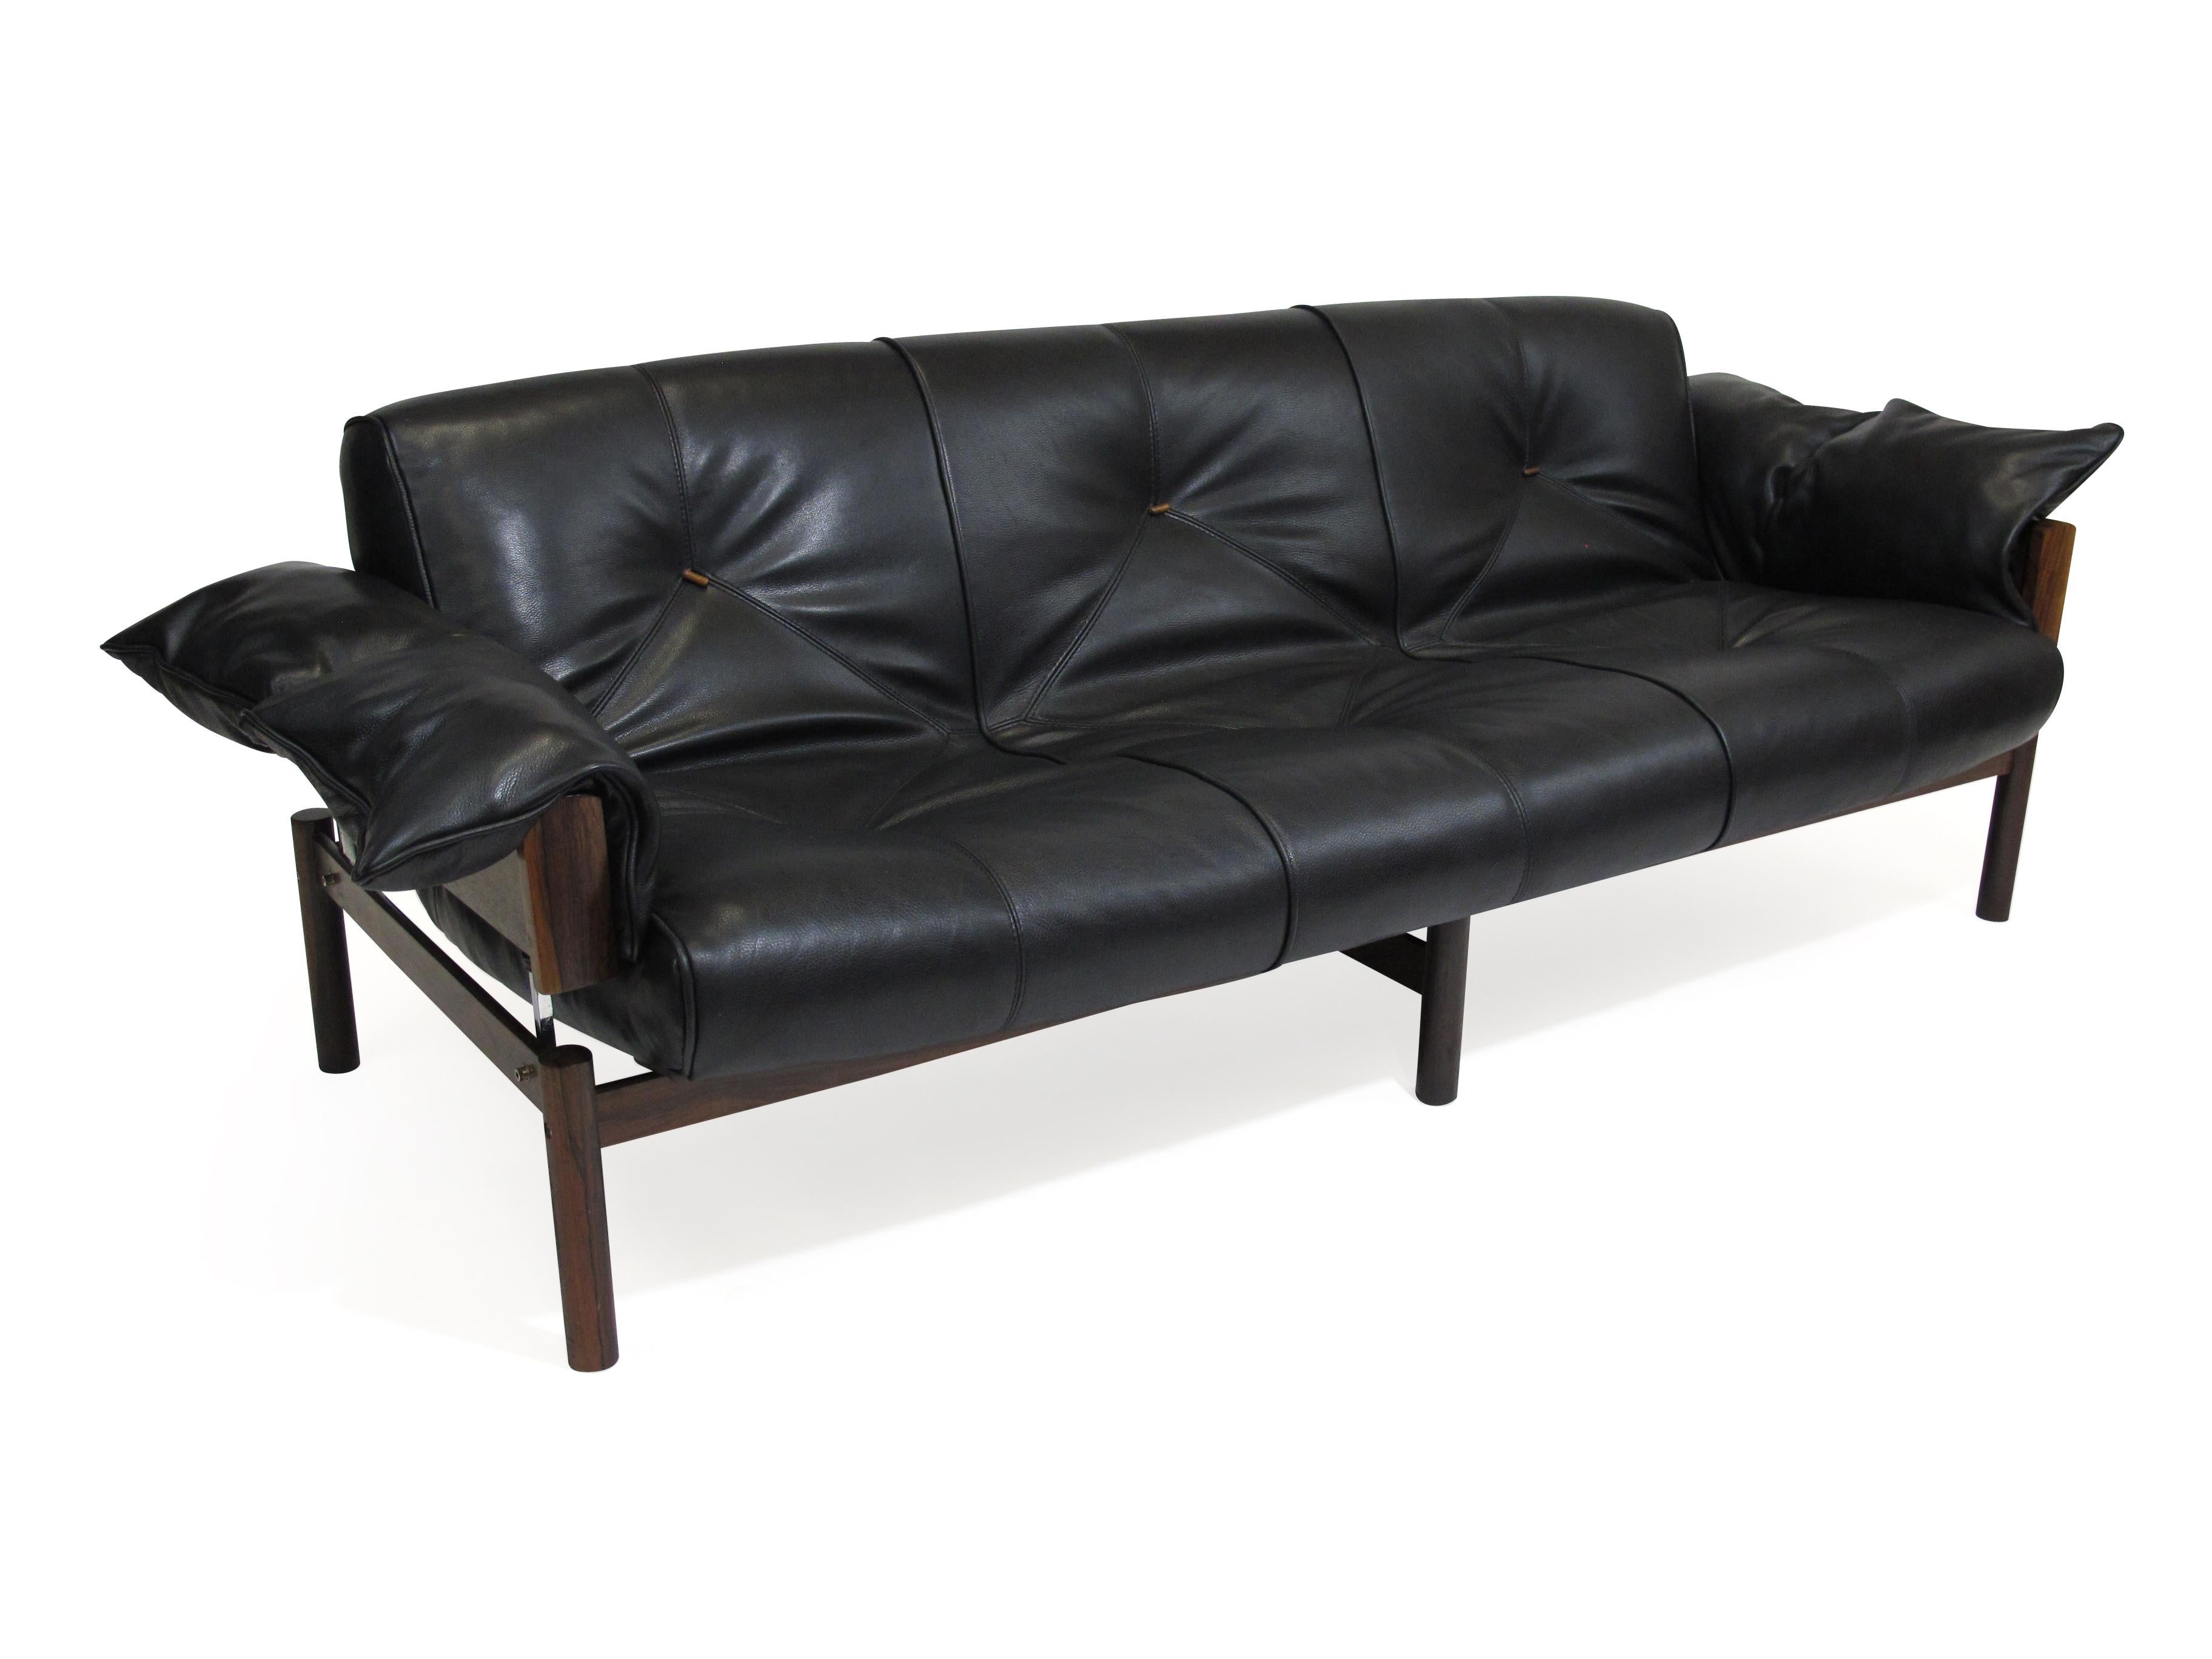 Mid-Century Modern 1960 Percival Lafer Brazilian Rosewood Sofa and Chair in Black Leather